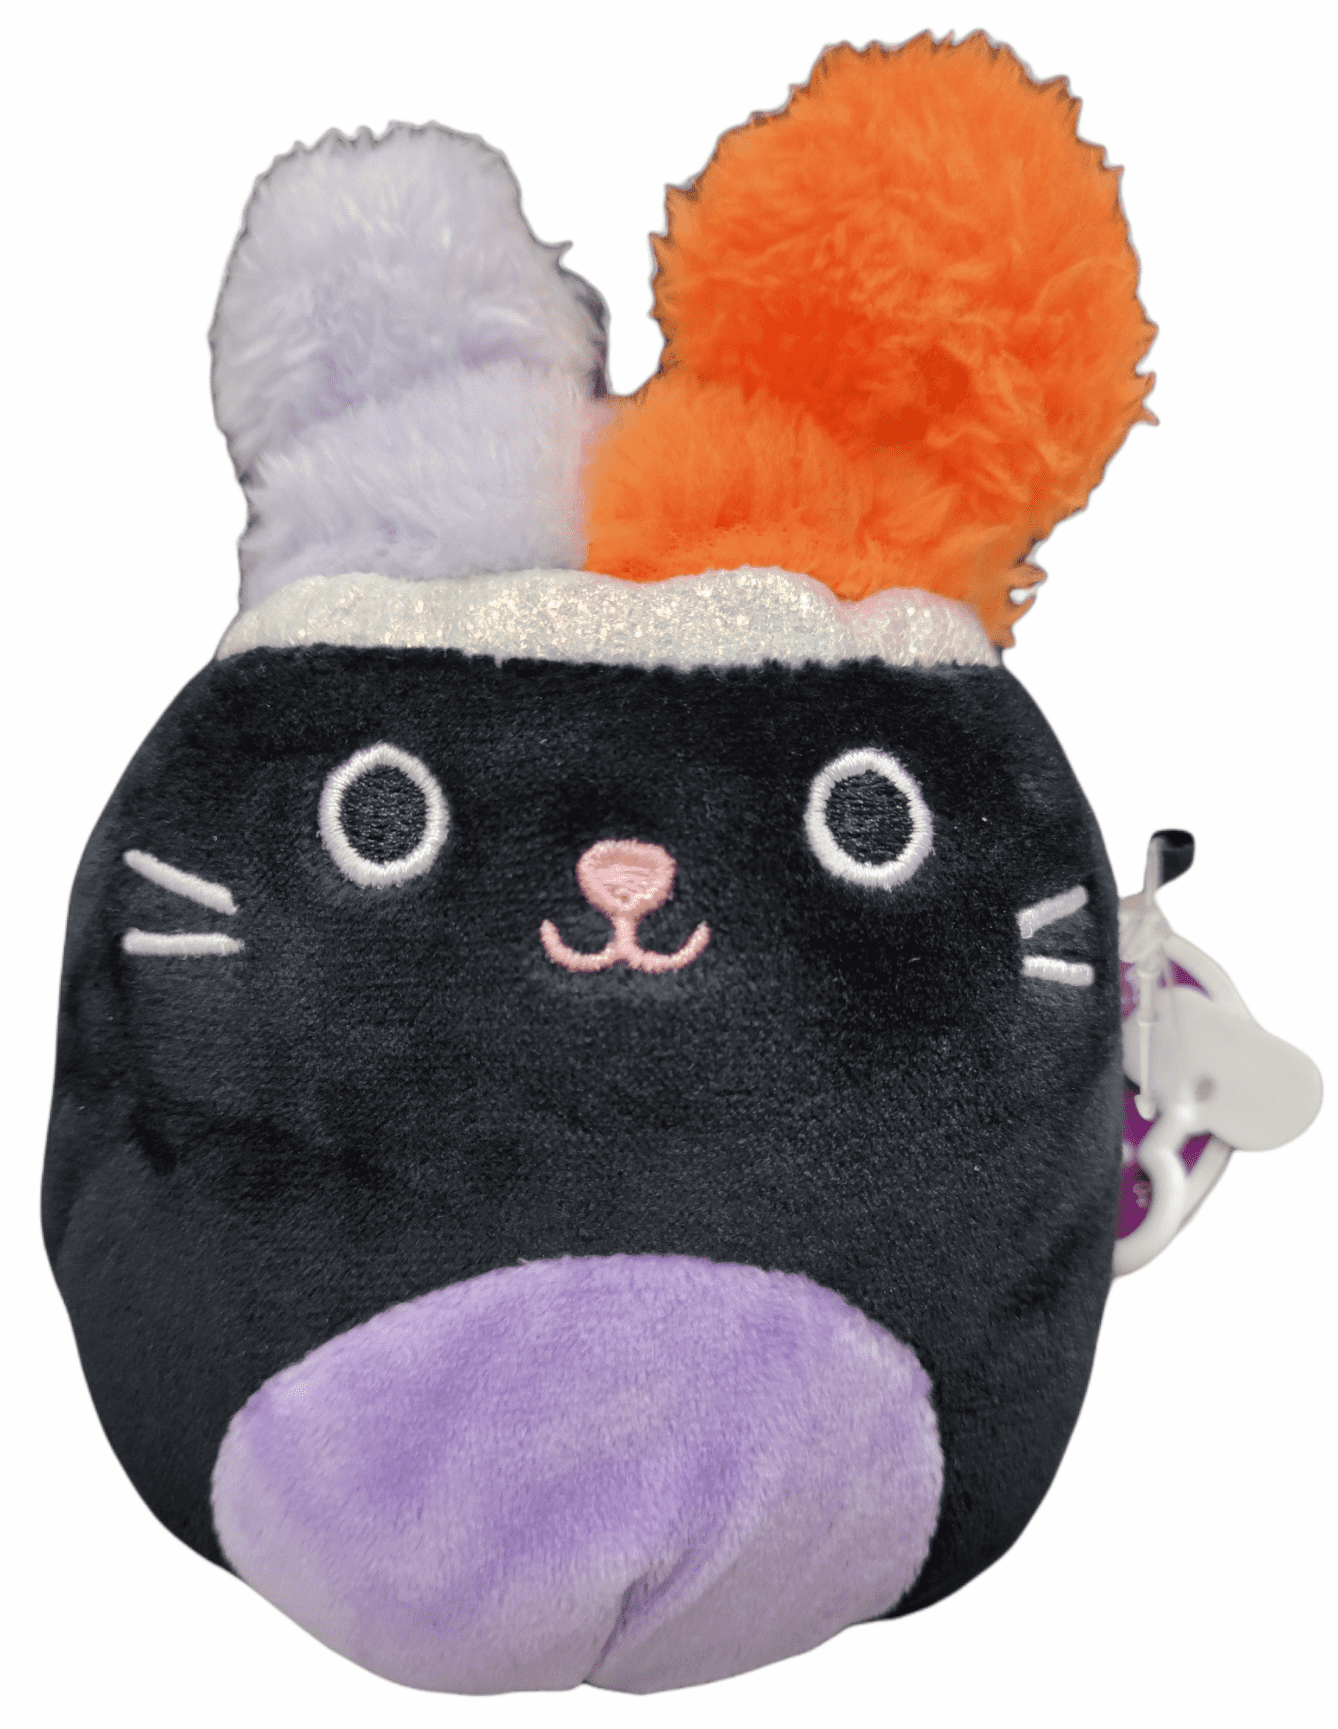 Complete your set! New 4.5" 2019 Squishmallows by Kellytoy Halloween